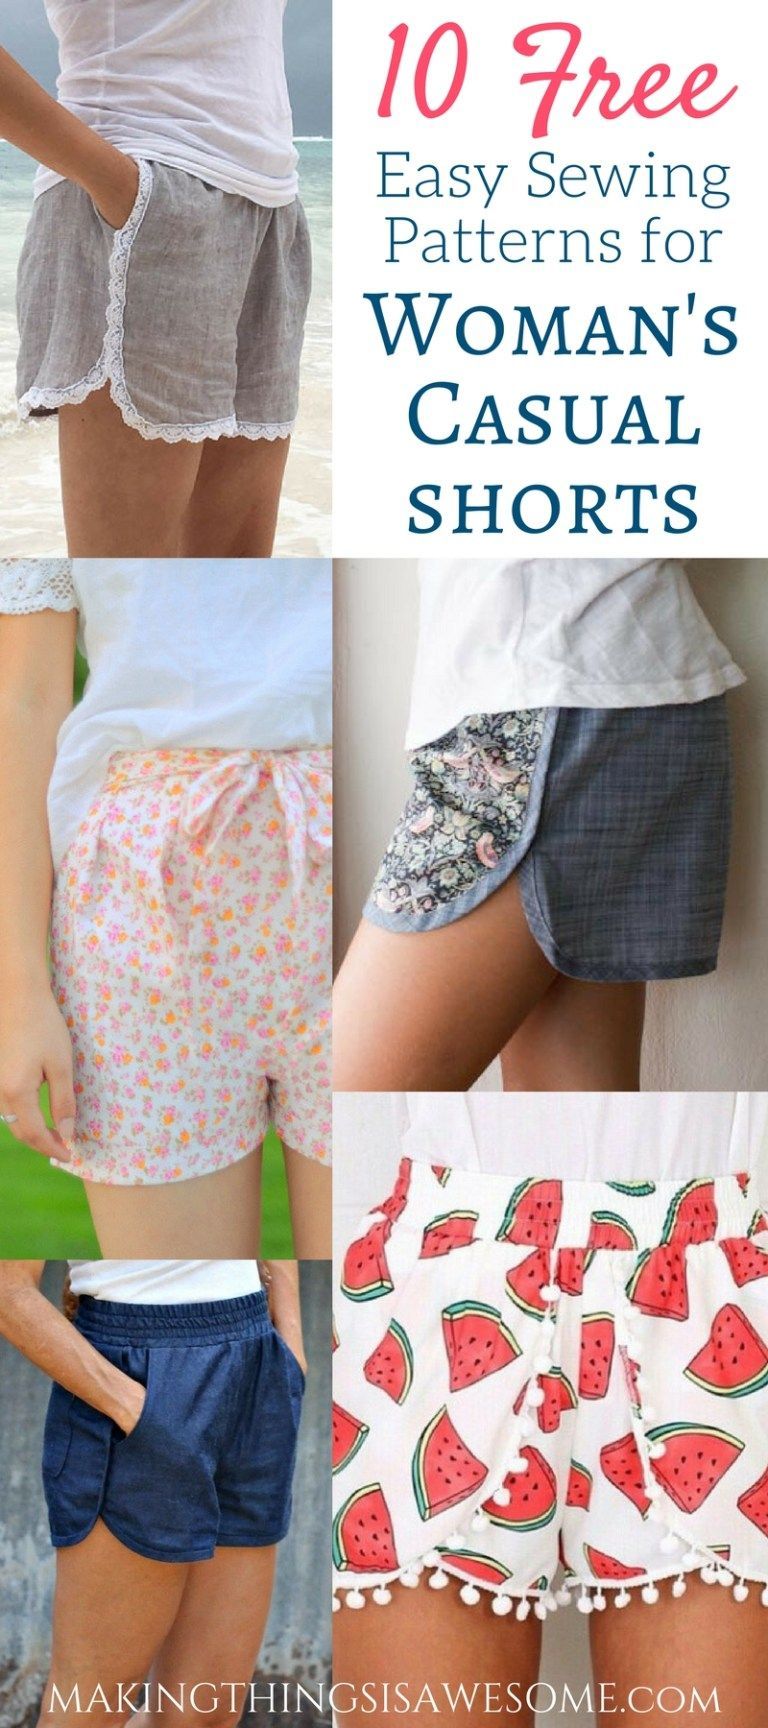 10 Free Woman's Casual Shorts Sewing Patterns: Round-up! - Making Things is Awesome - 10 Free Woman's Casual Shorts Sewing Patterns: Round-up! - Making Things is Awesome -   17 diy Clothes easy ideas